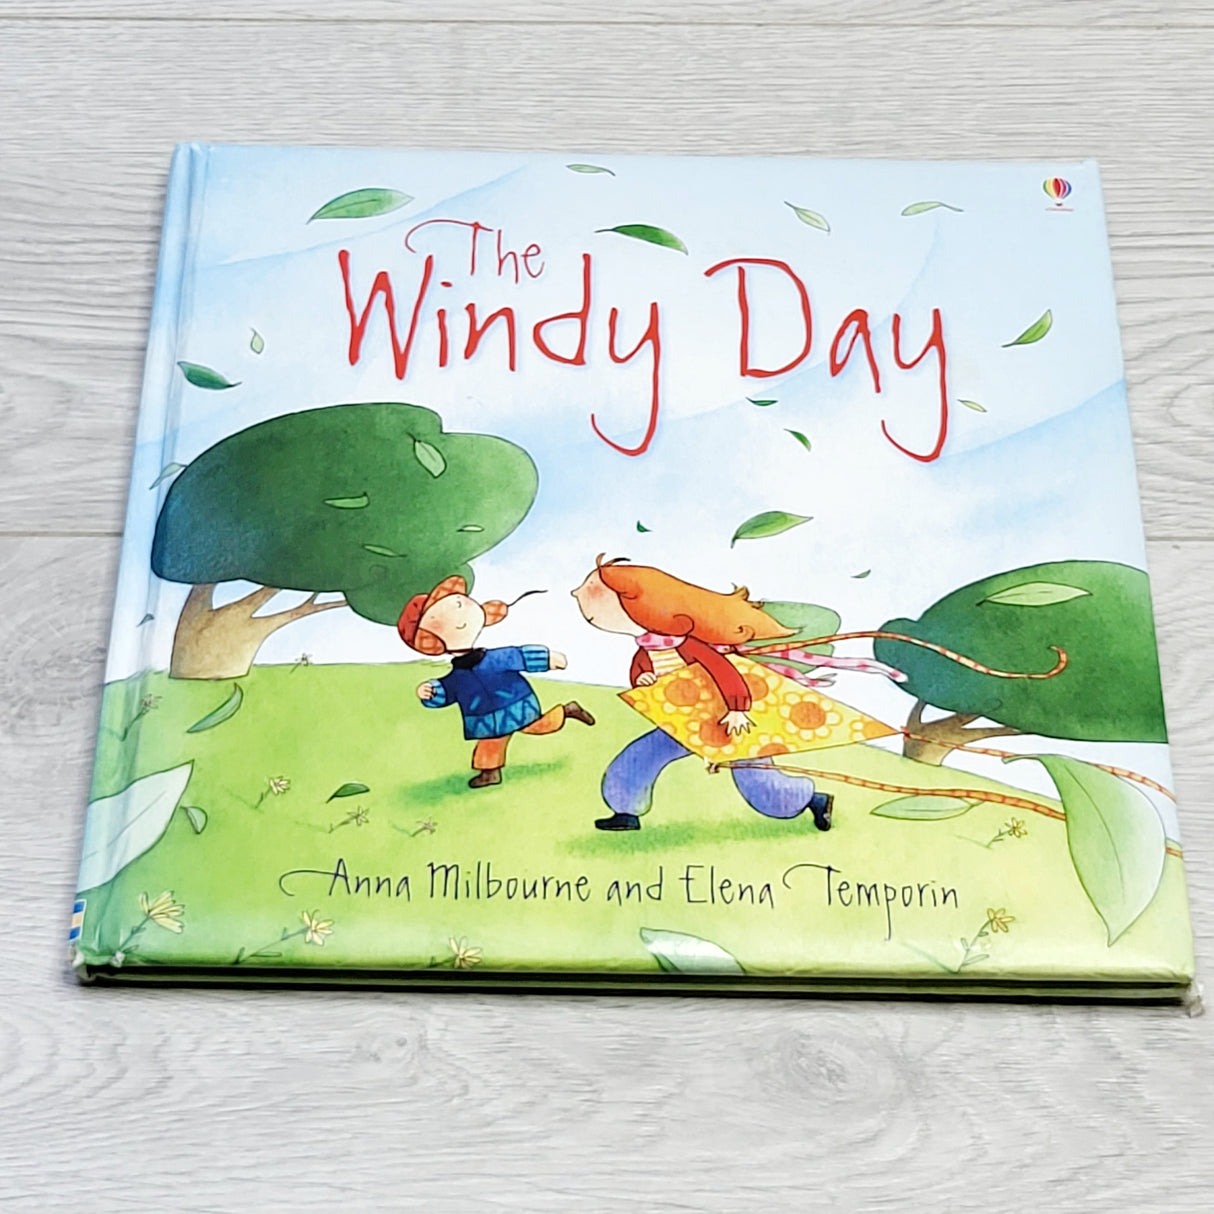 MSNDS2 - The Windy Day large hardcover Usborne book